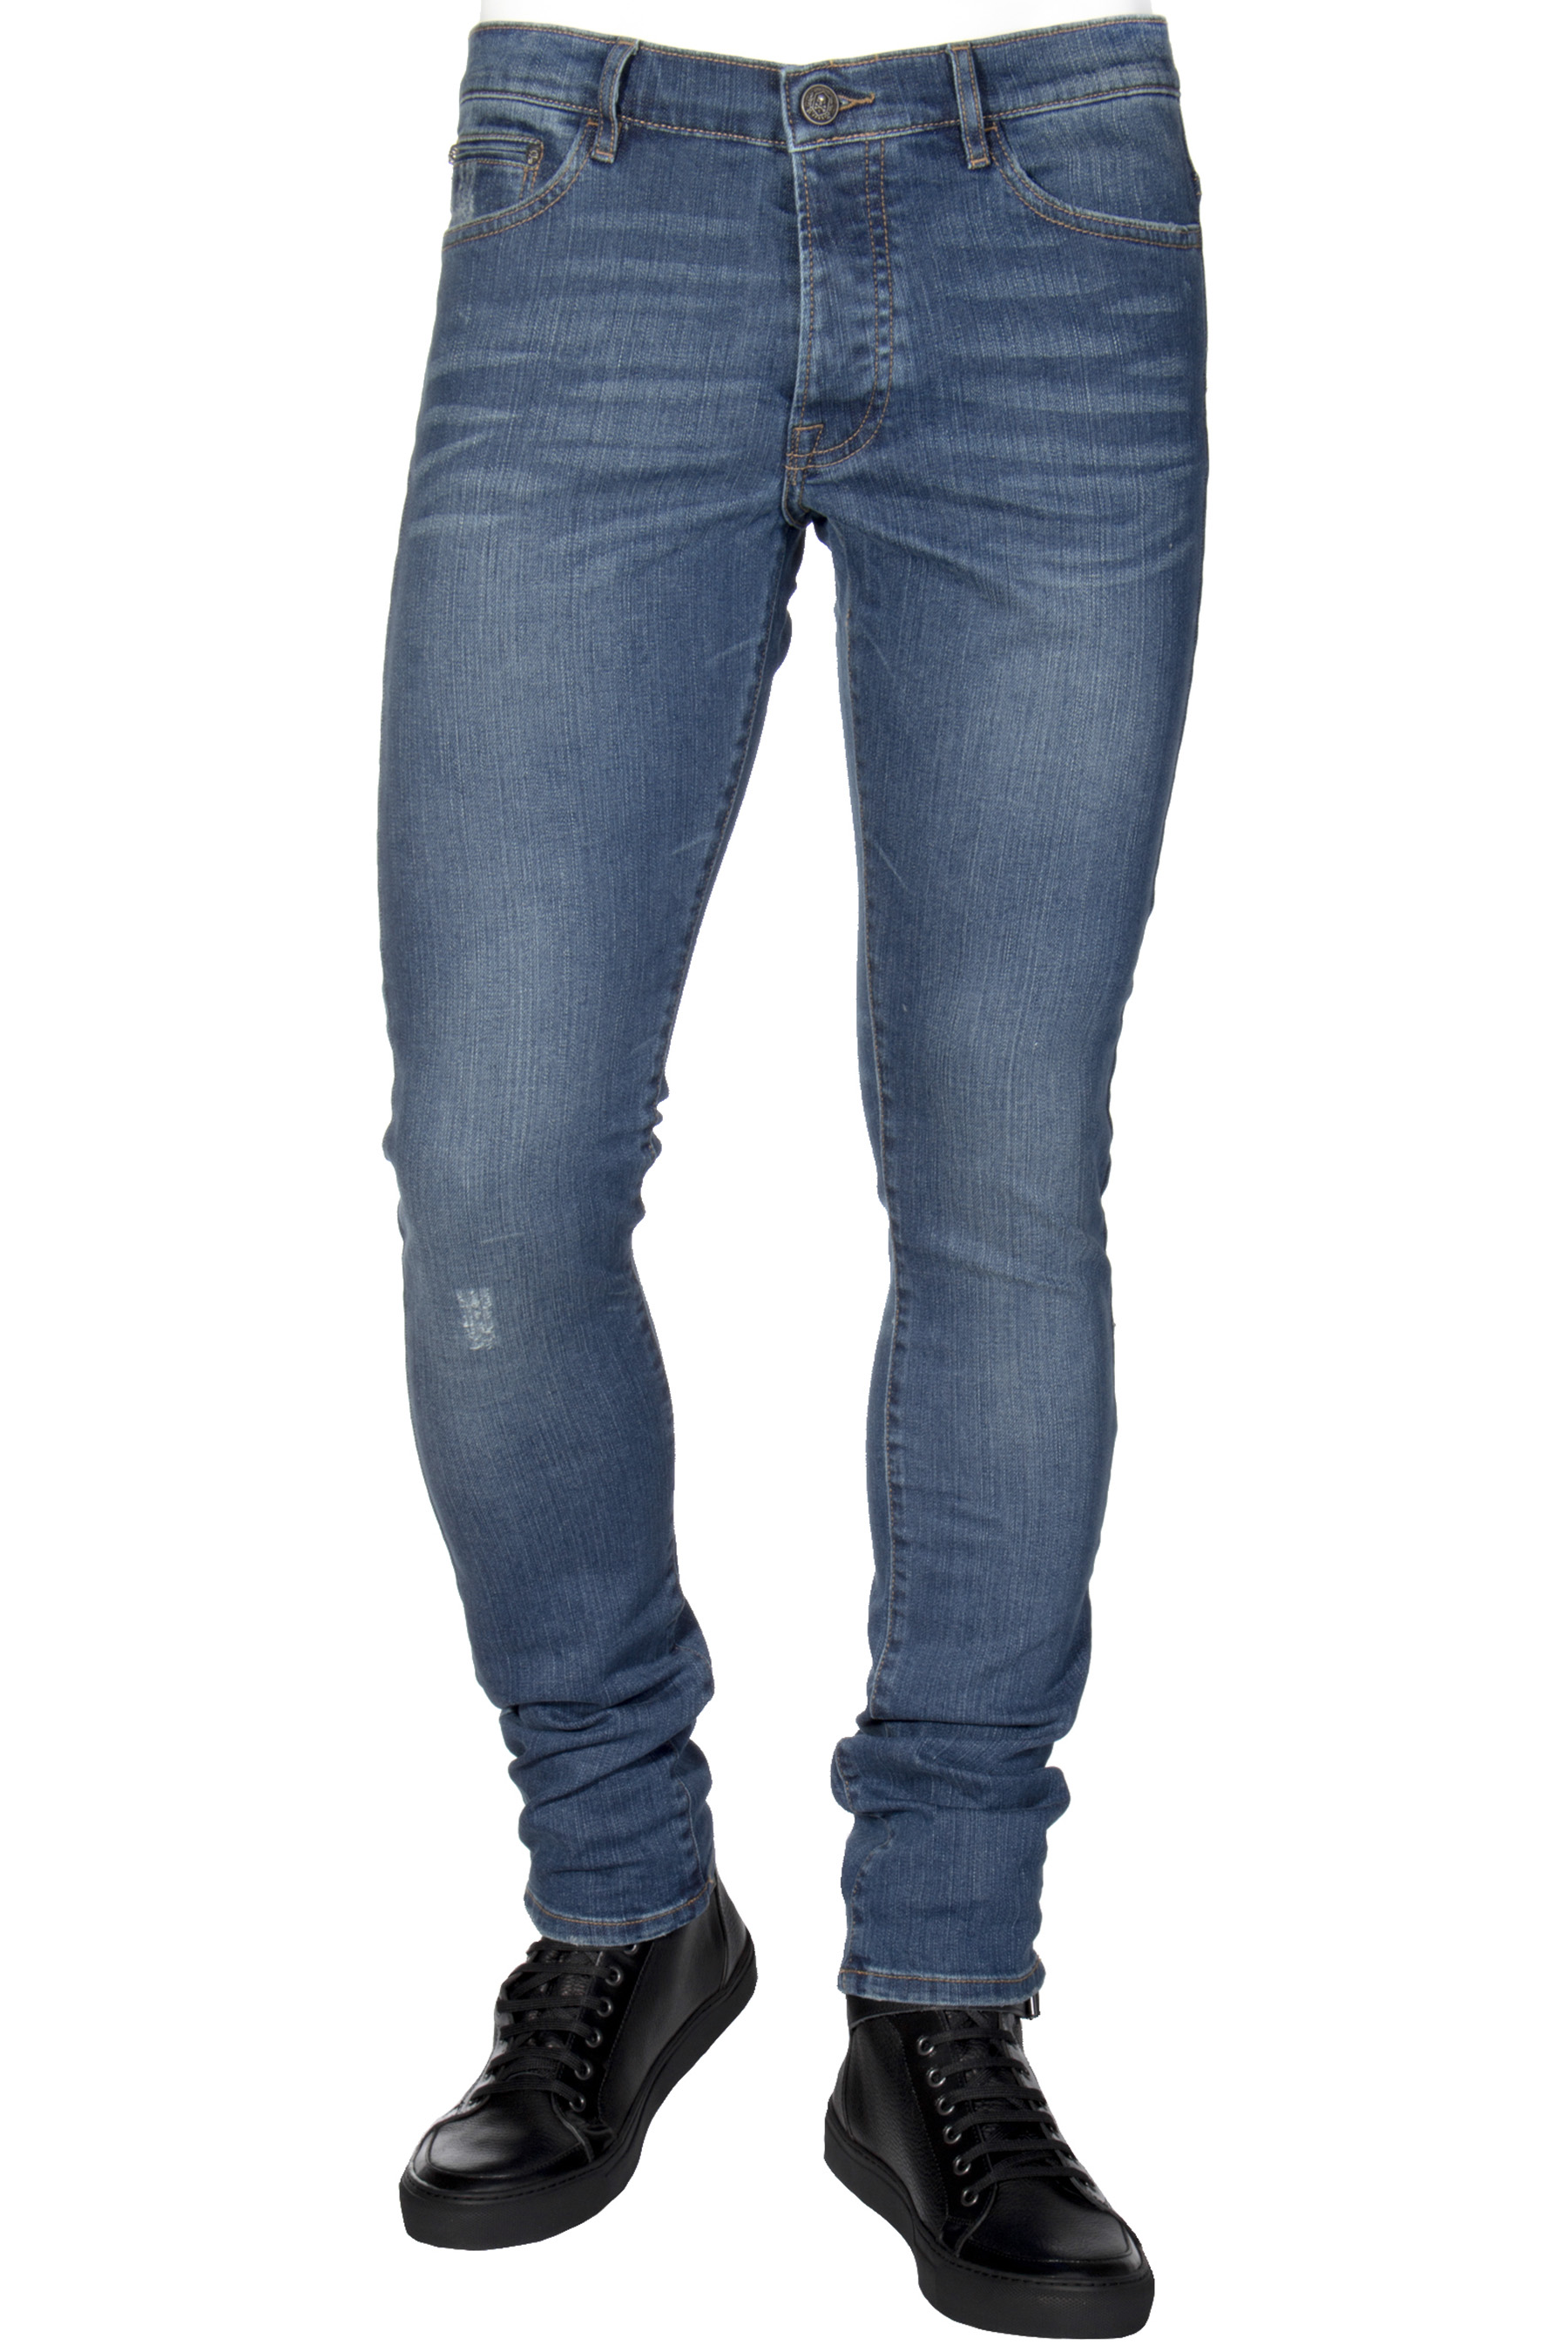 THE KOOPLES Jeans Fitted | Jeans | Clothing | Men | mientus Online Store